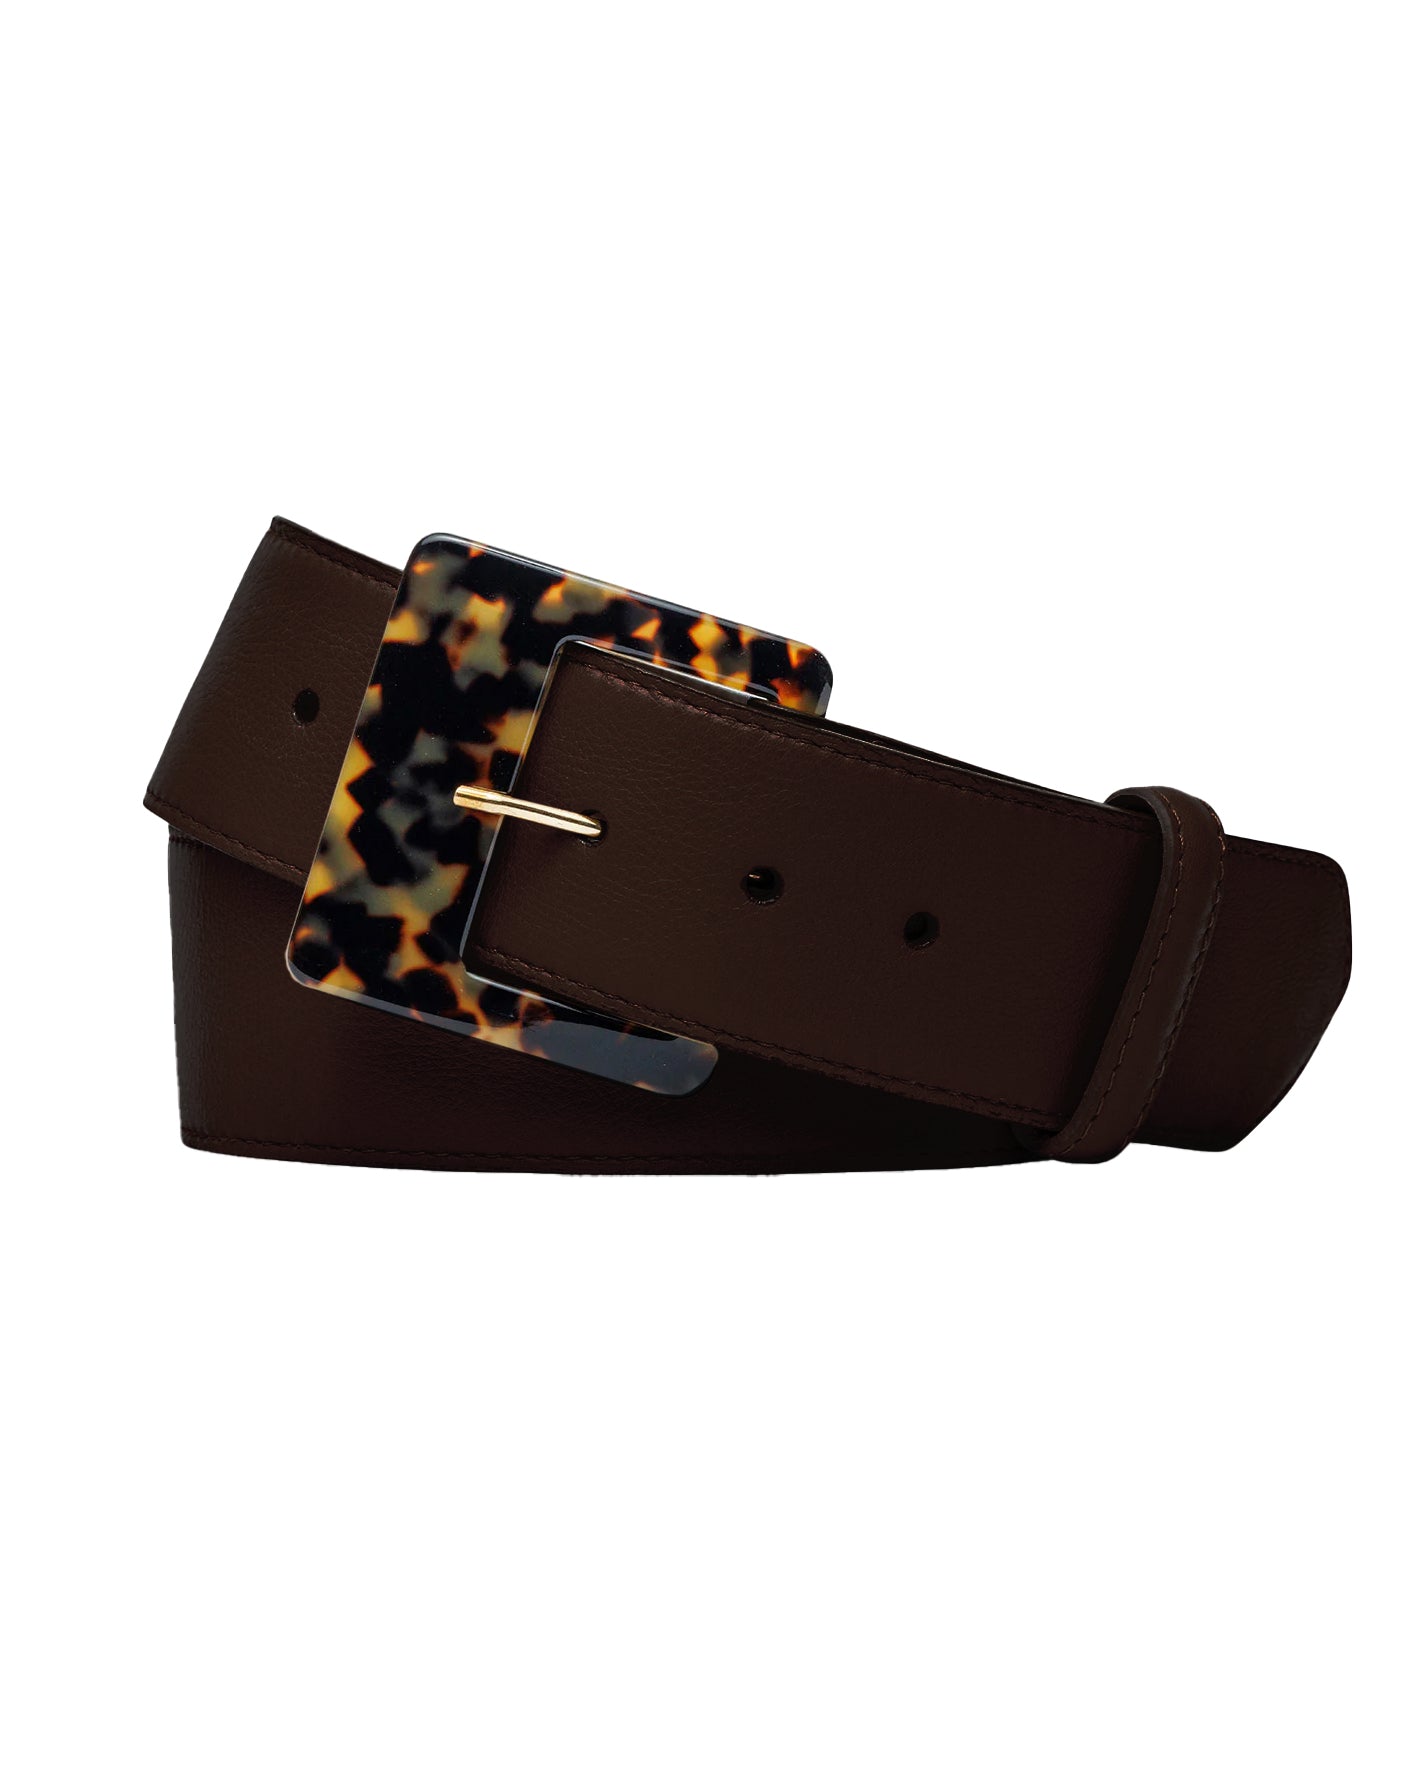 Tortoise Square Buckle (Chocolate Smooth)